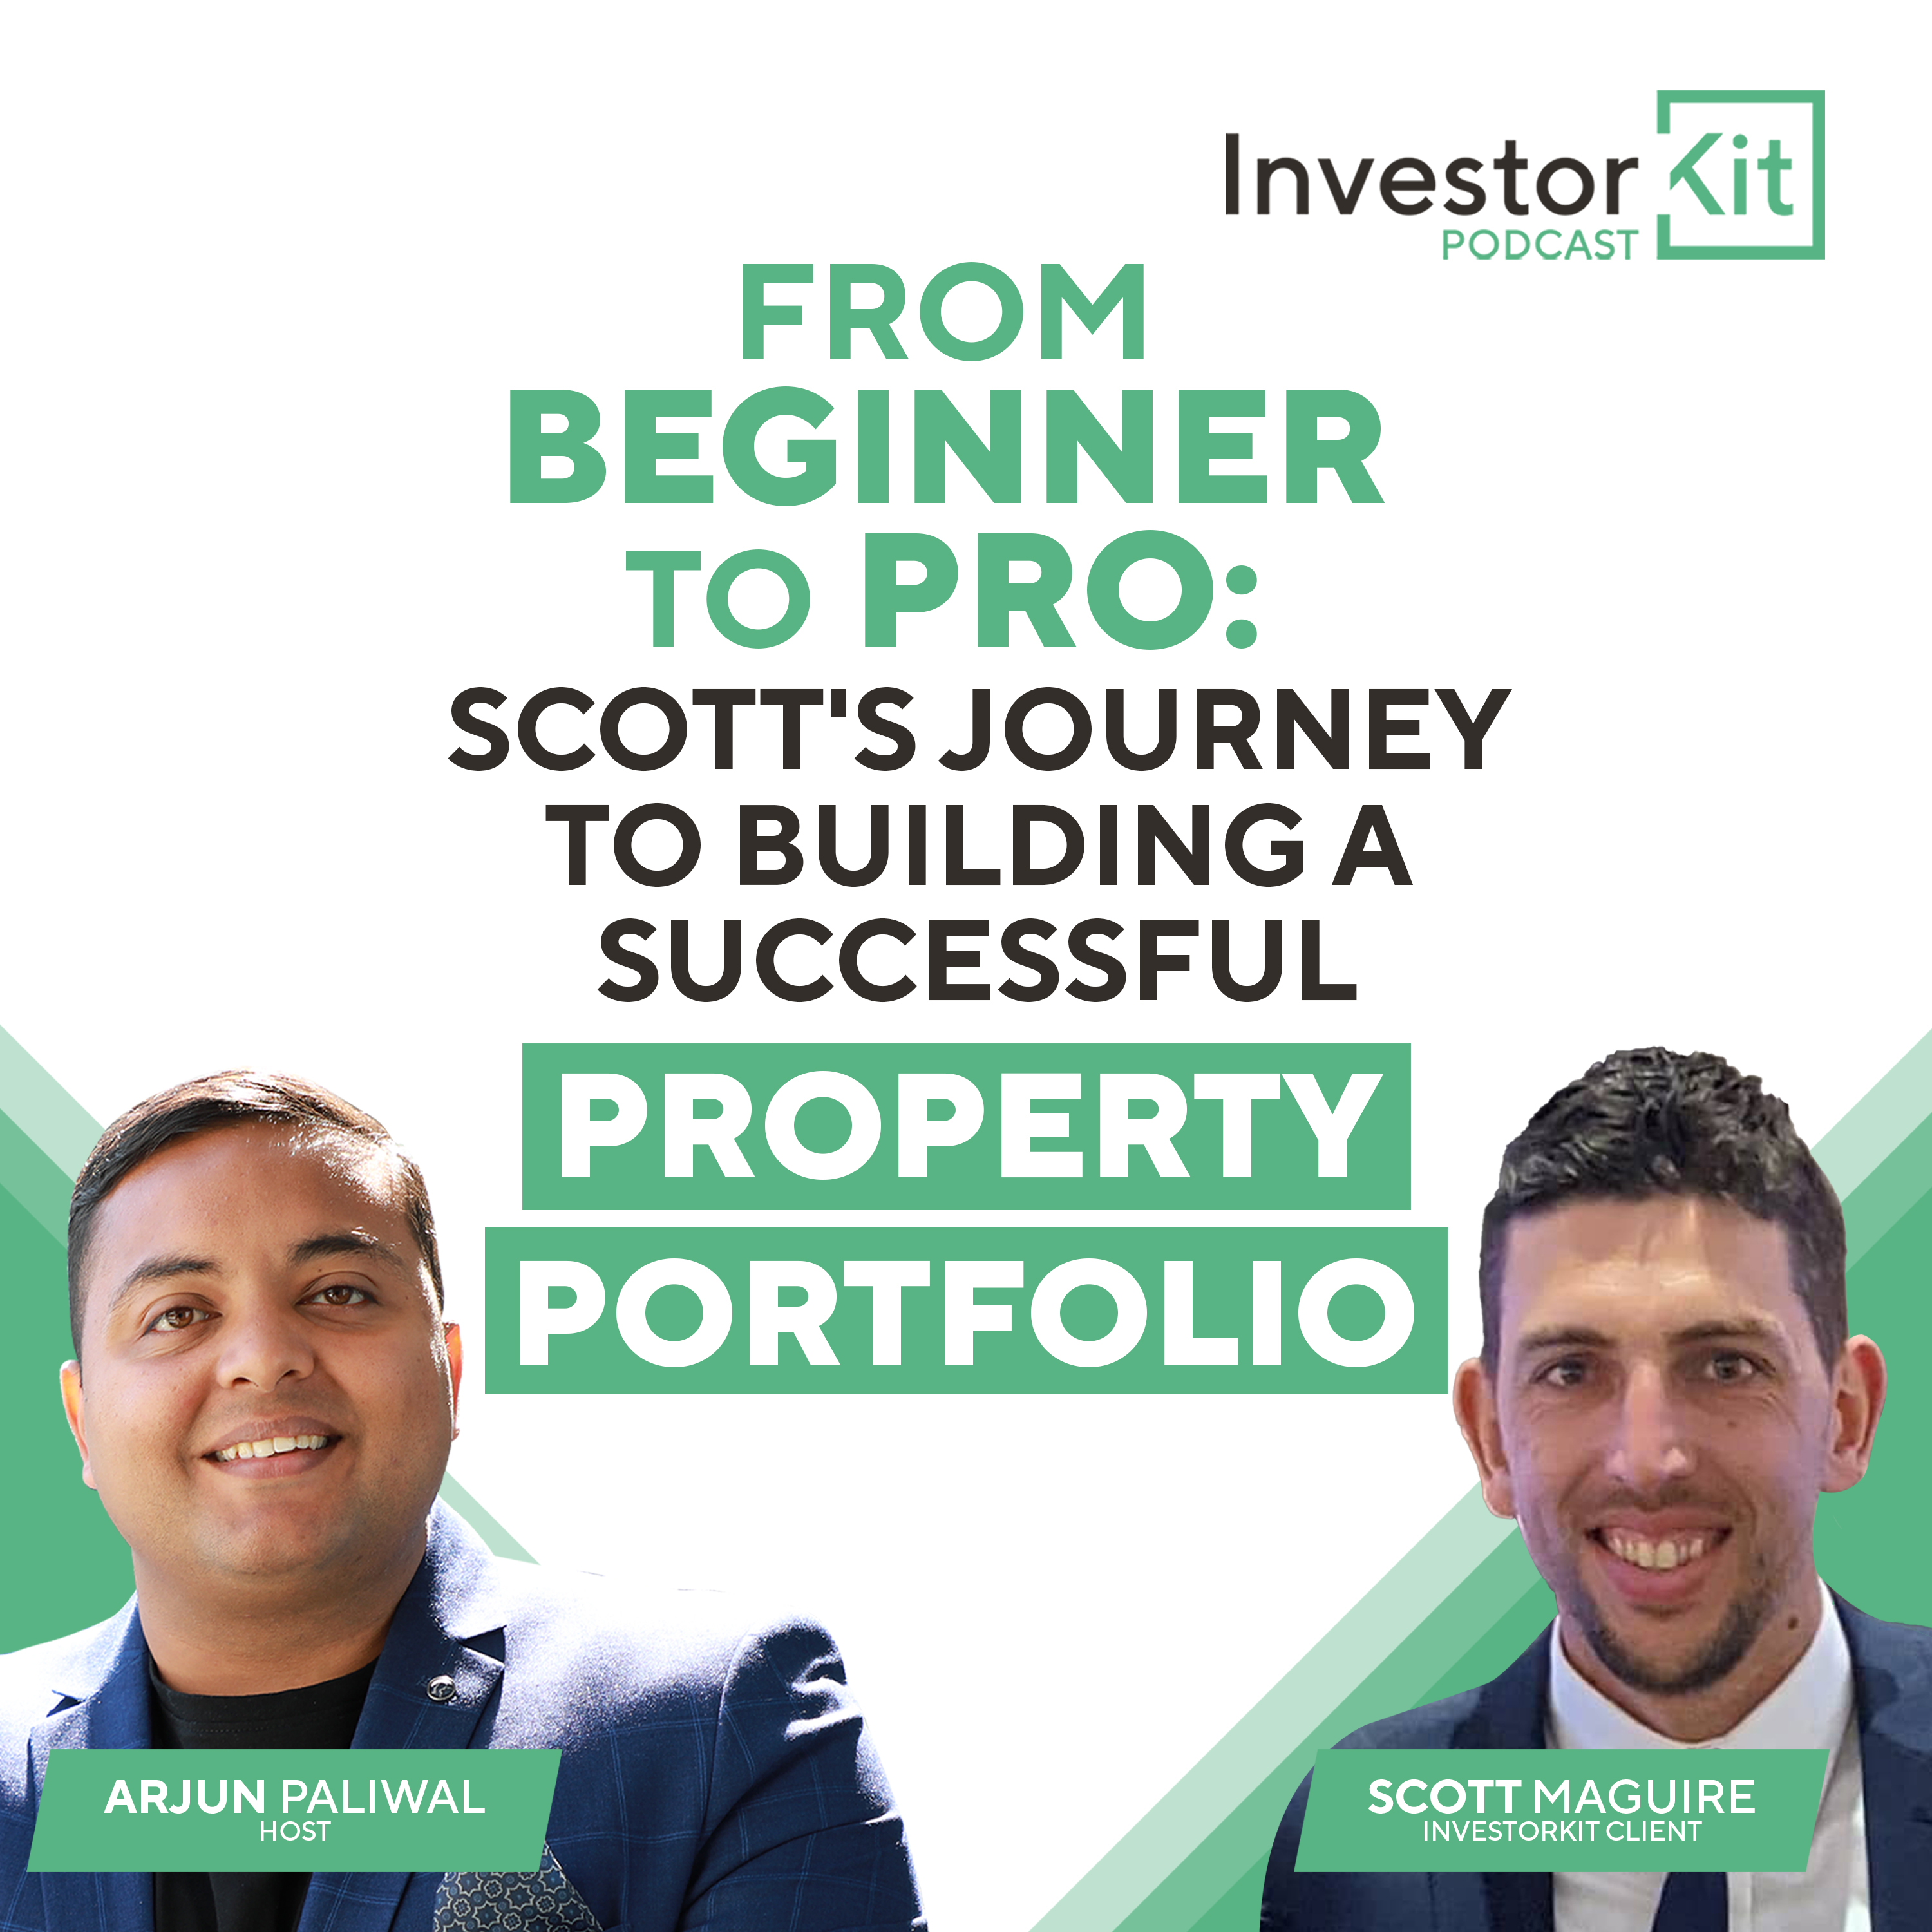 From Beginner to Pro: Scott's Journey to Building a Successful Property Portfolio